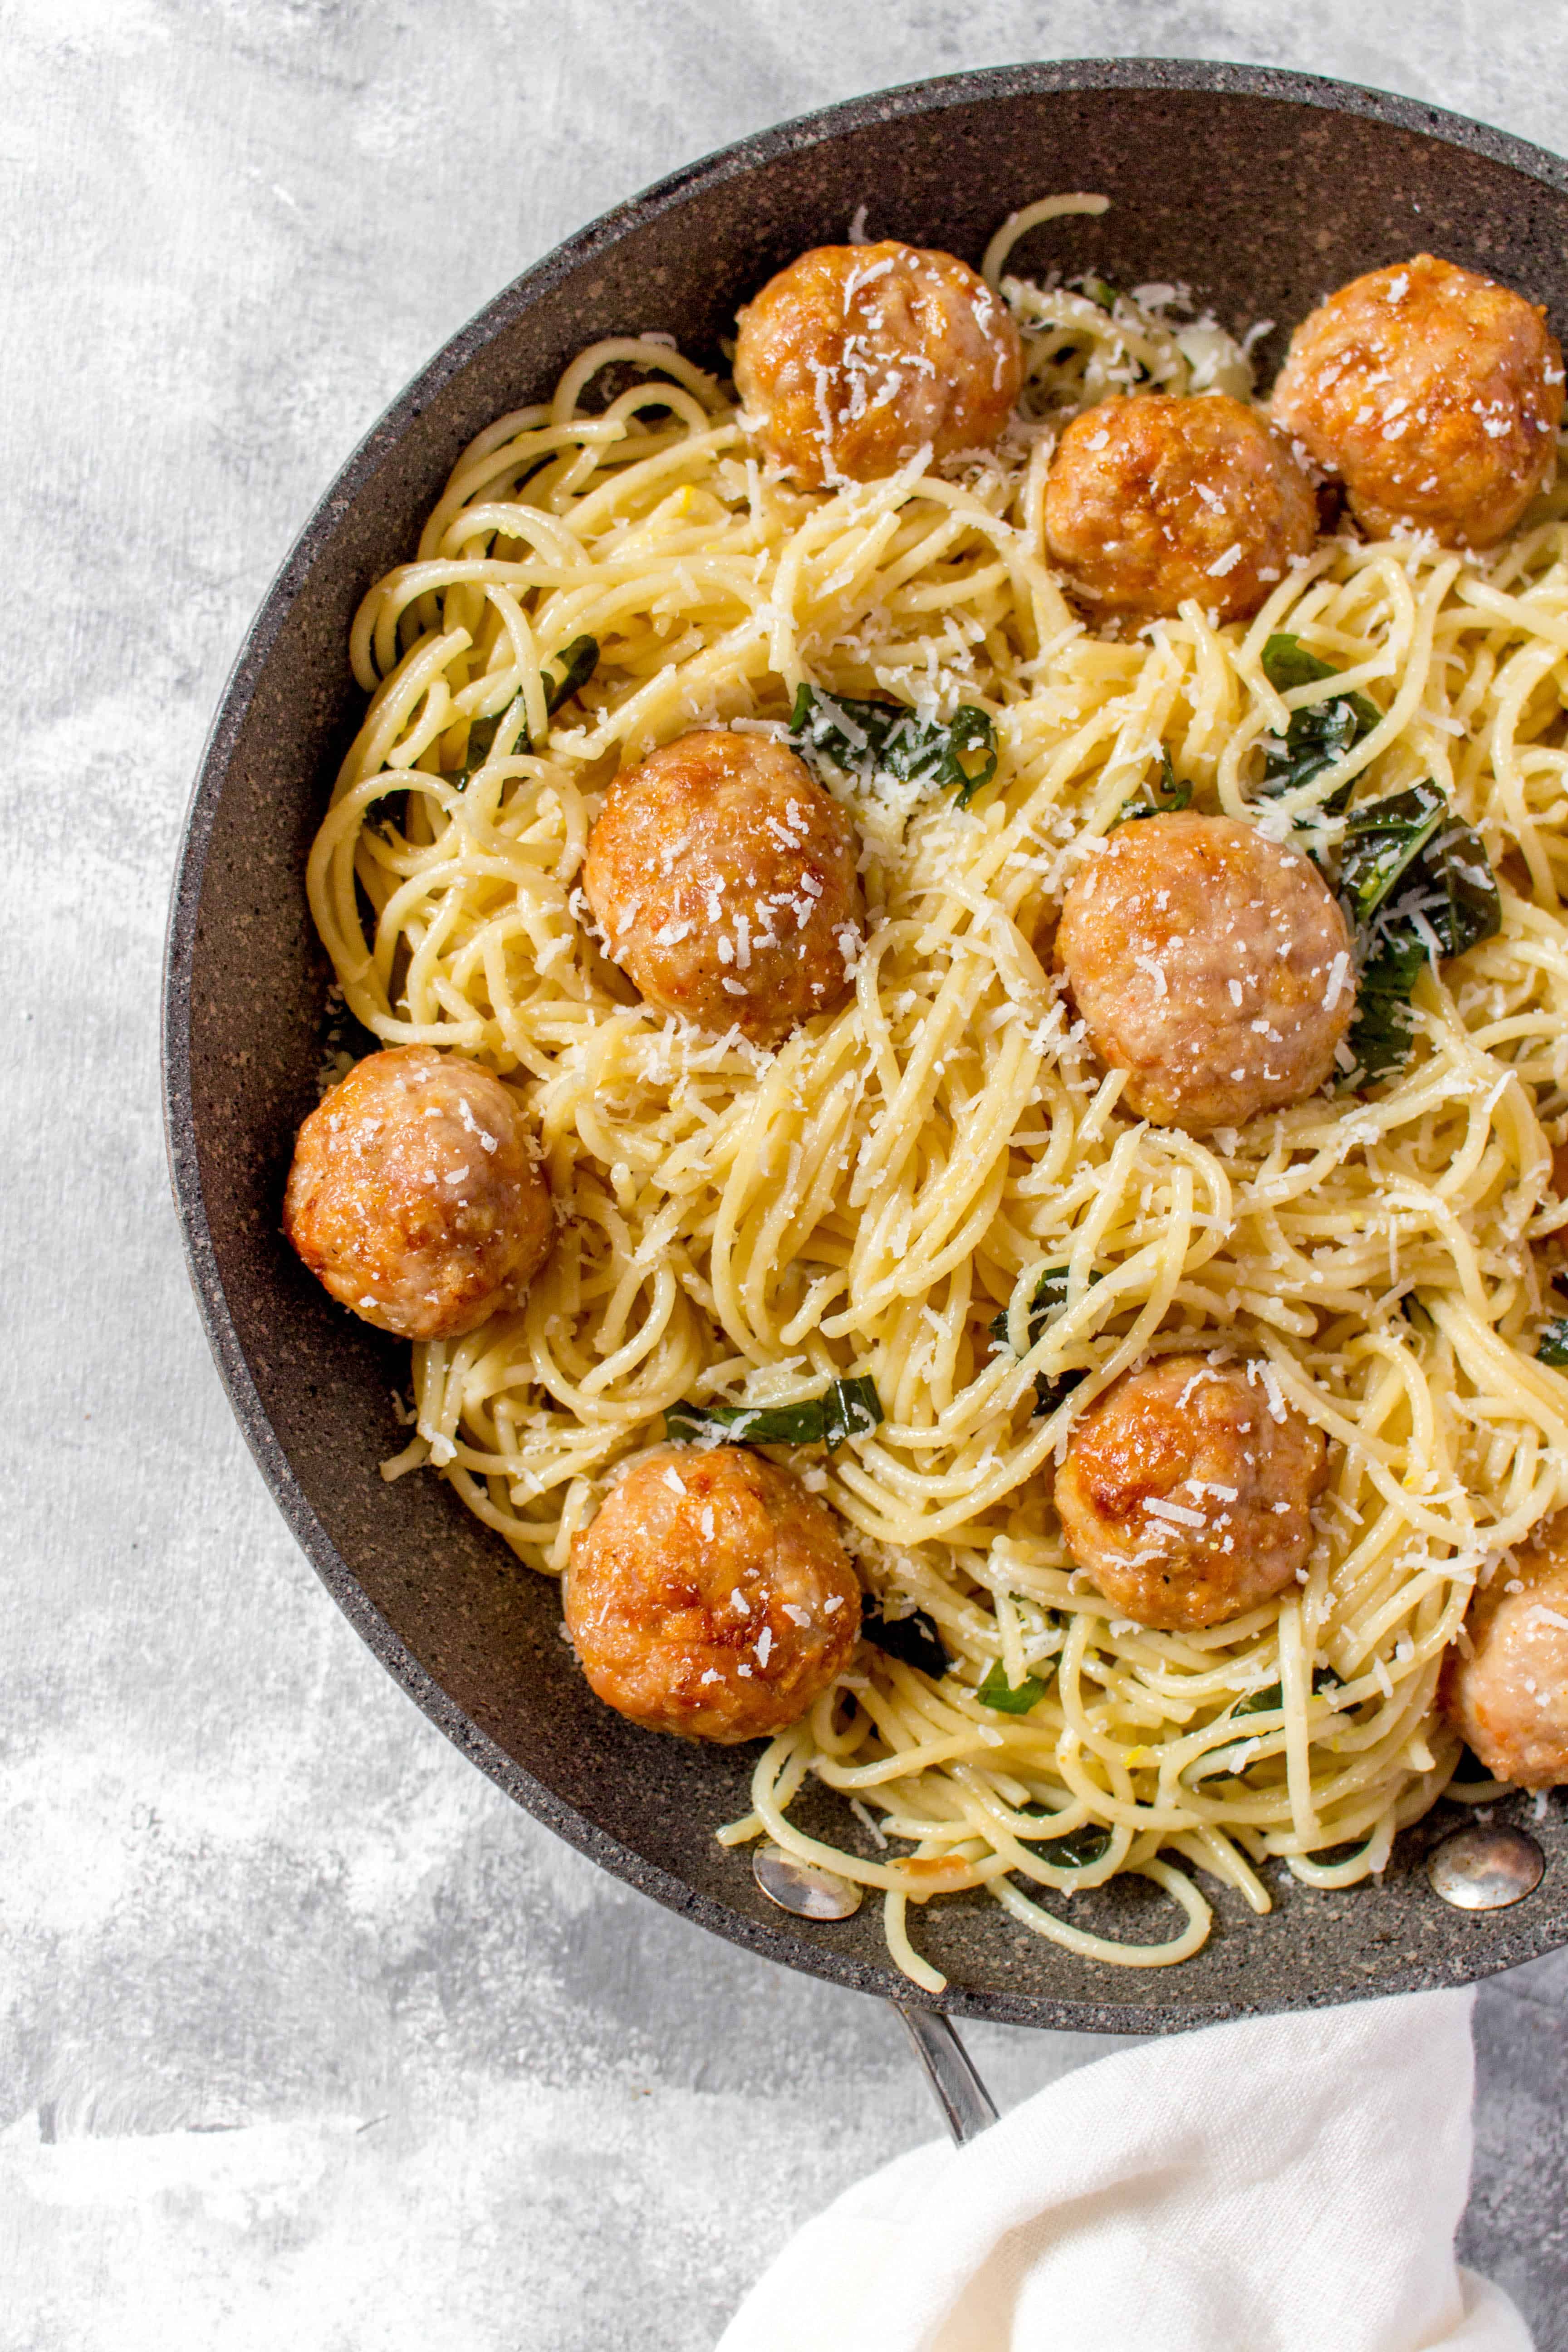 You really can't go wrong with Lemon Garlic Basil Butter Spaghetti with Chicken Meatballs for dinner! The spaghetti is so easy to whip up with pantry staples and the chicken meatballs are freezer friendly so make a batch then freeze them for when you need them!